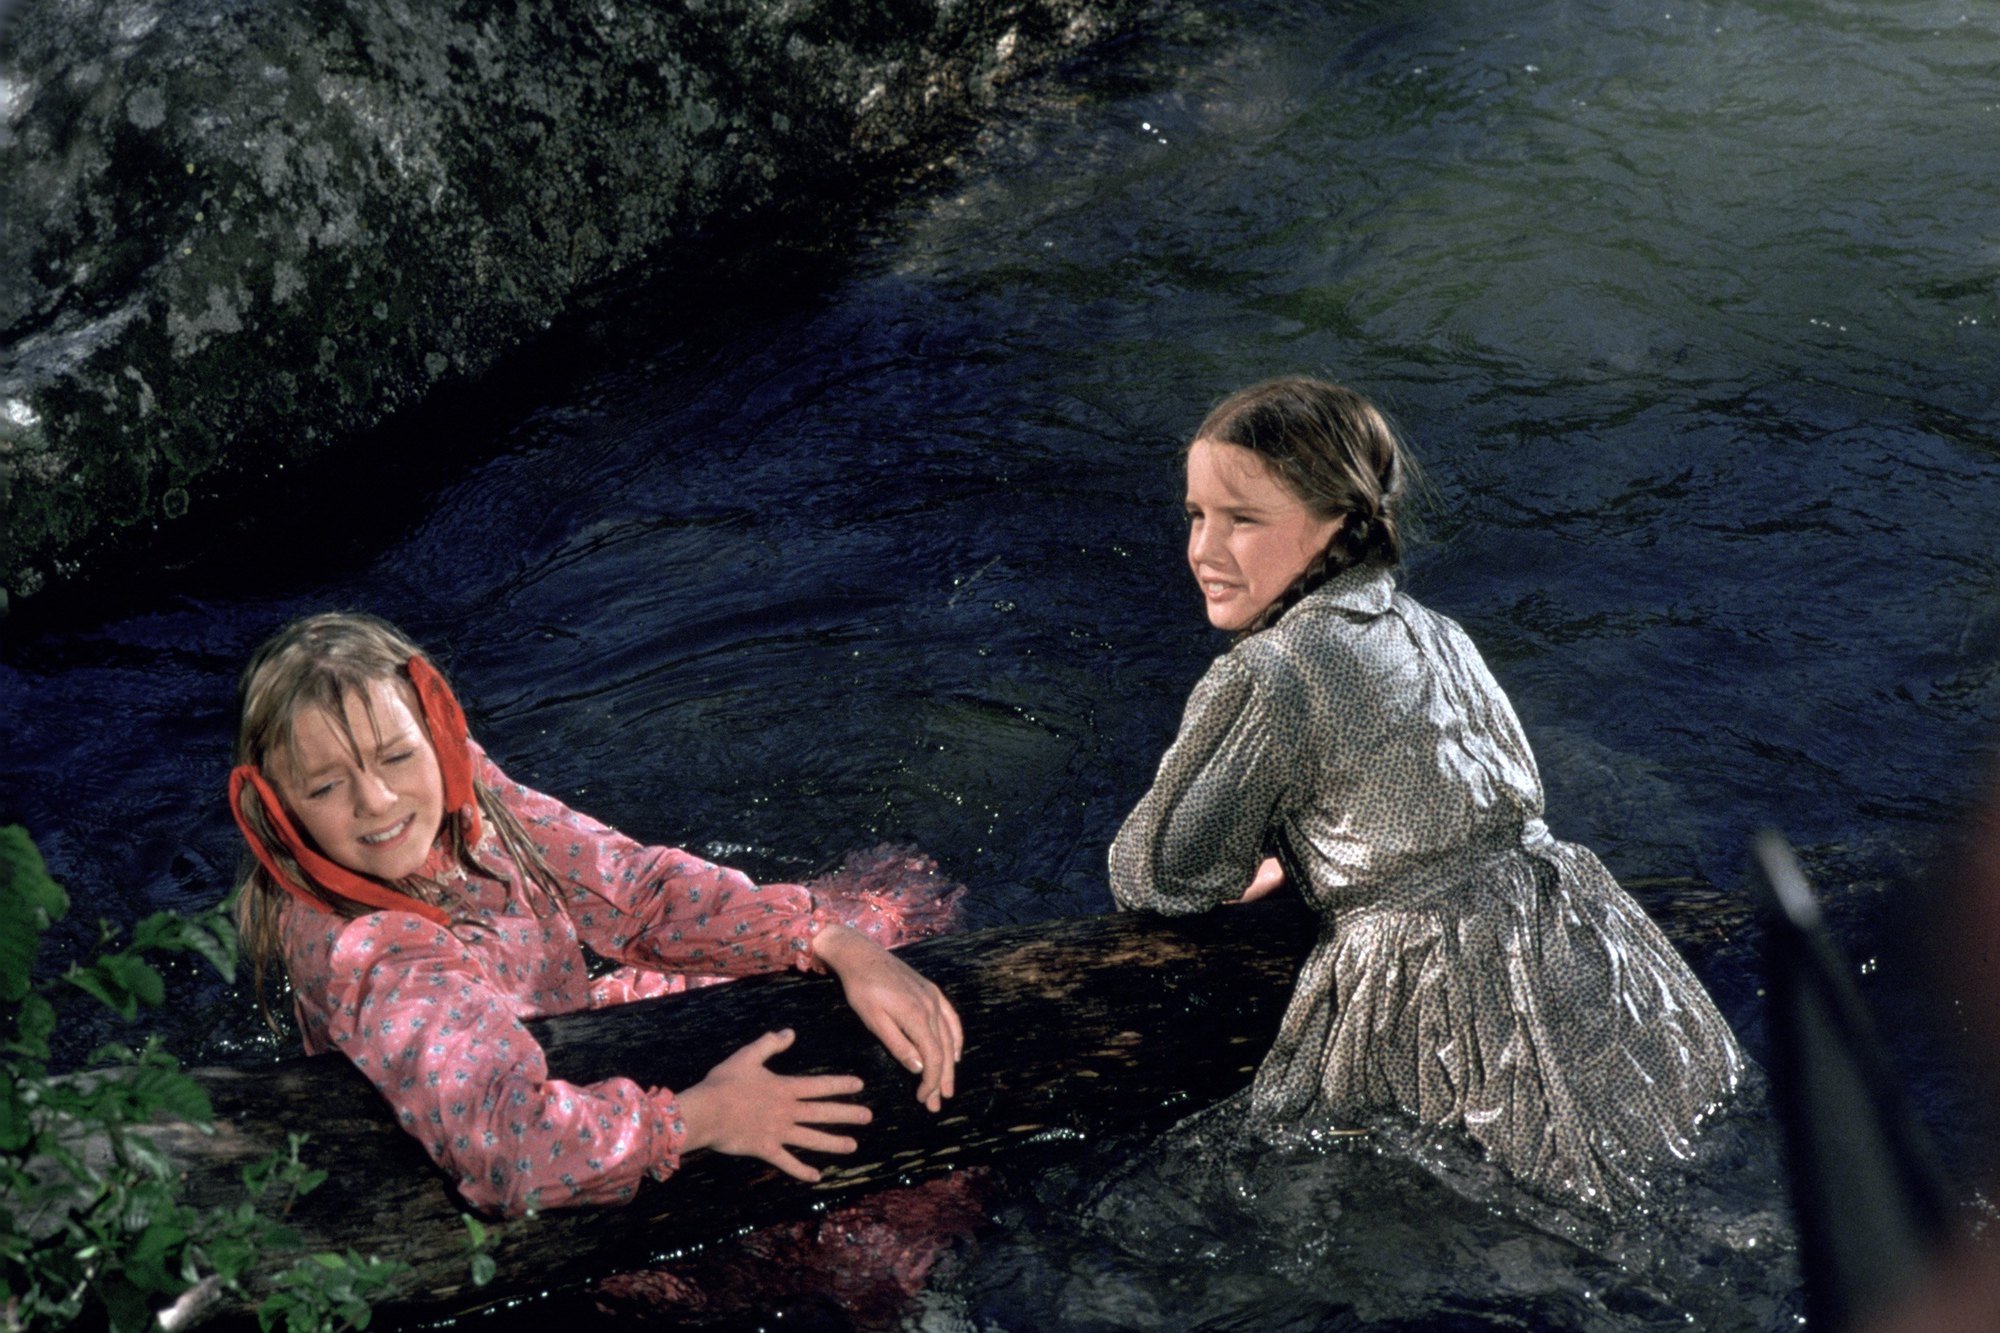 Melissa Gilbert and Alison Arngrim play in the water